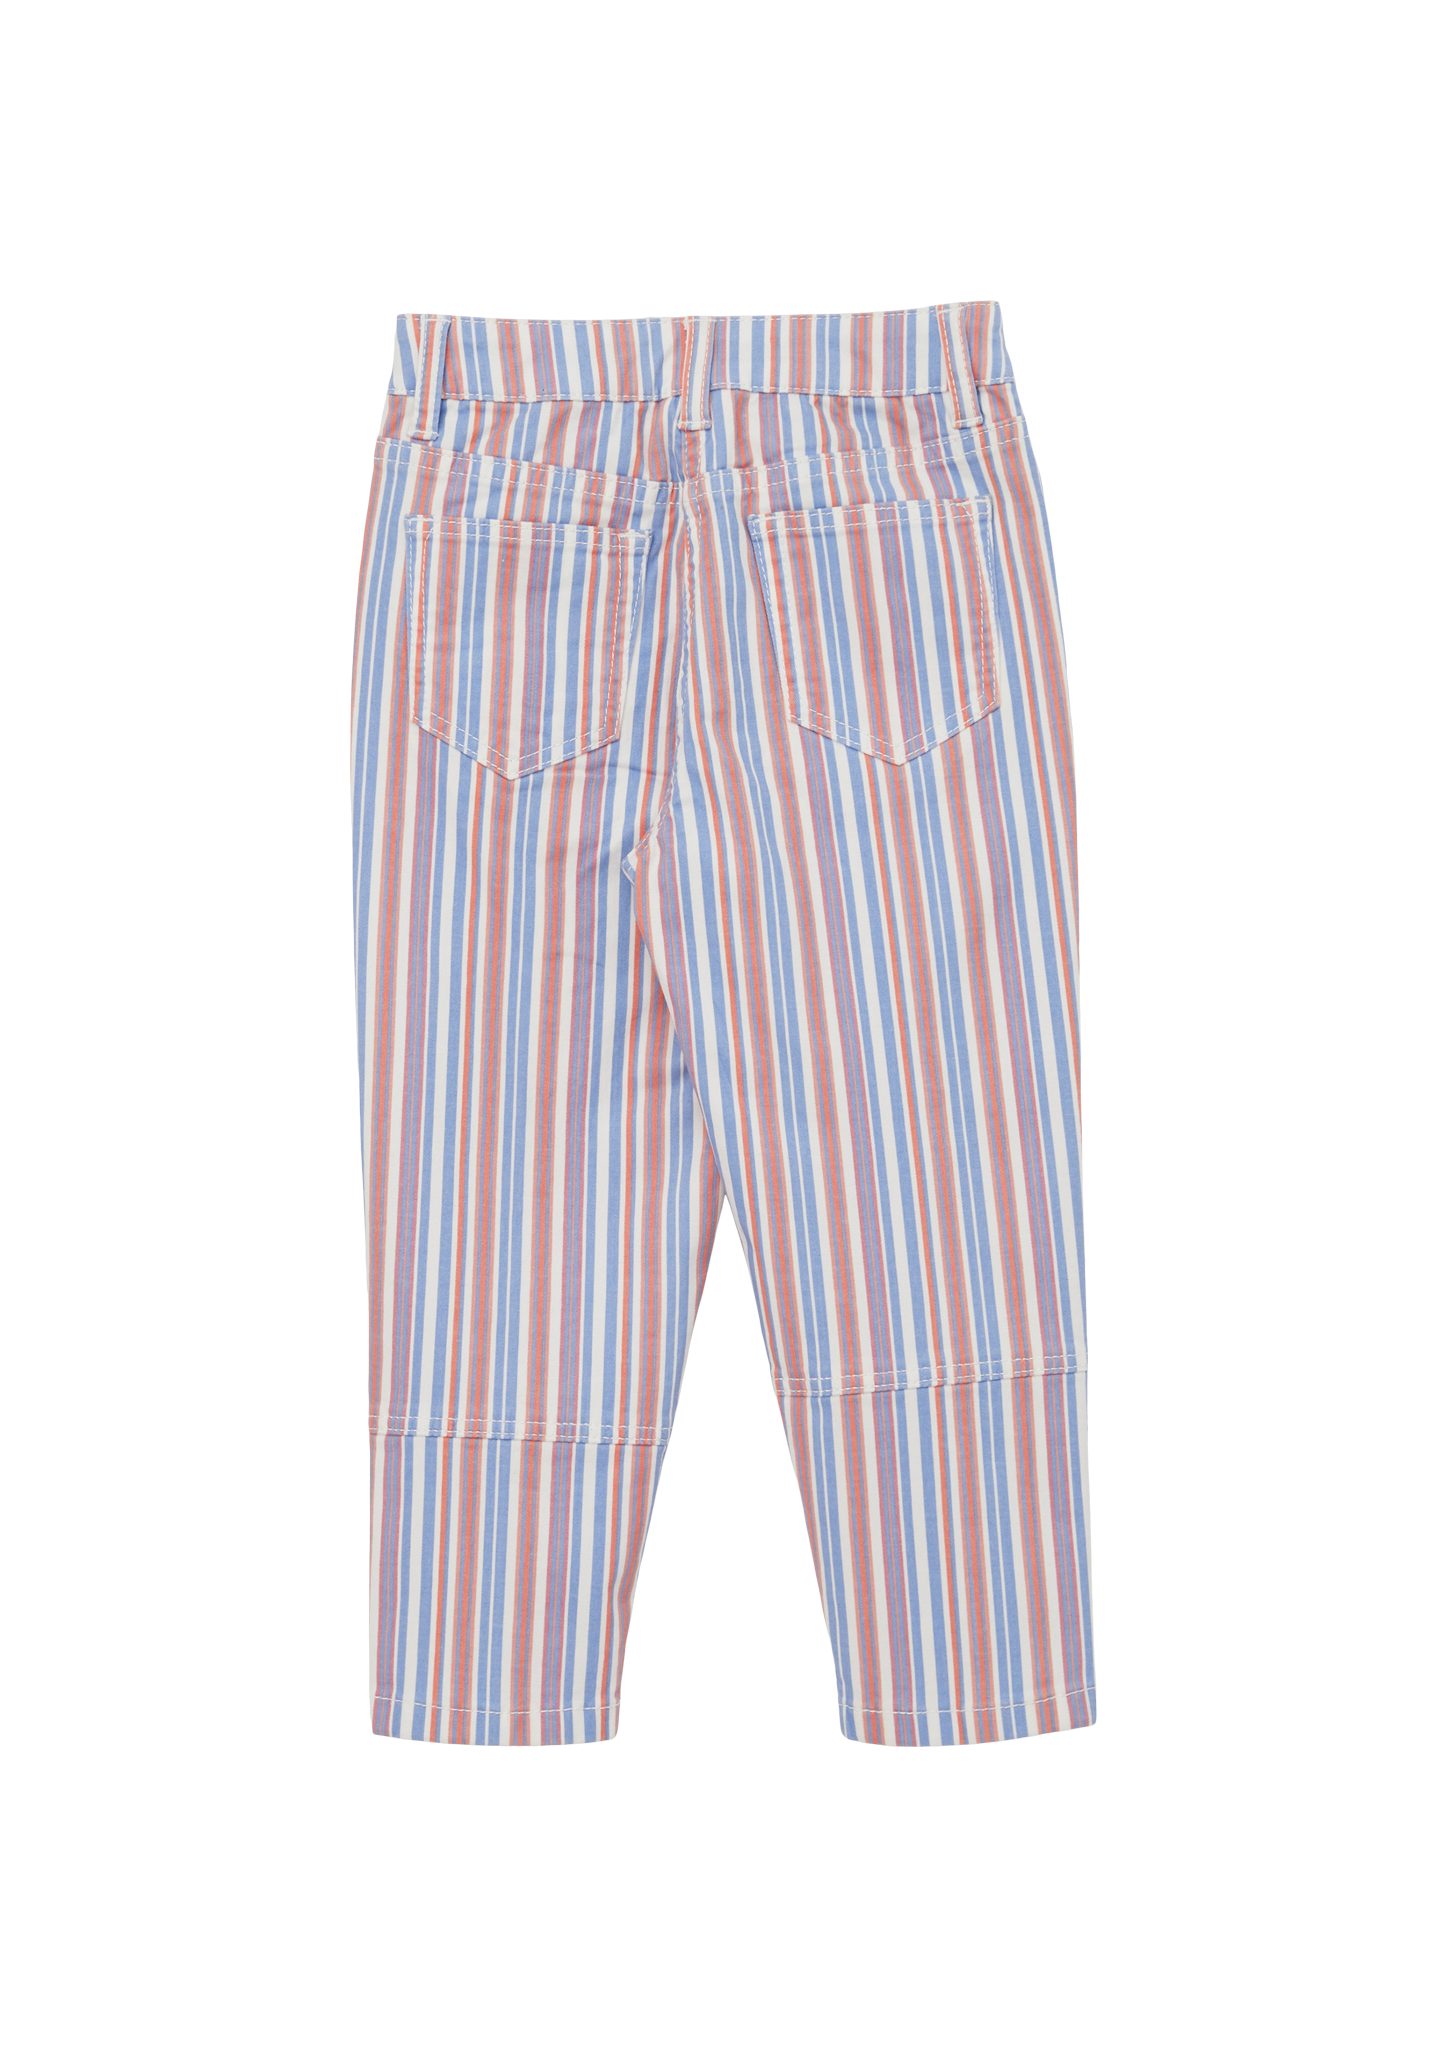 Relaxed: mit Steifenmuster Hose Stoffhose s.Oliver